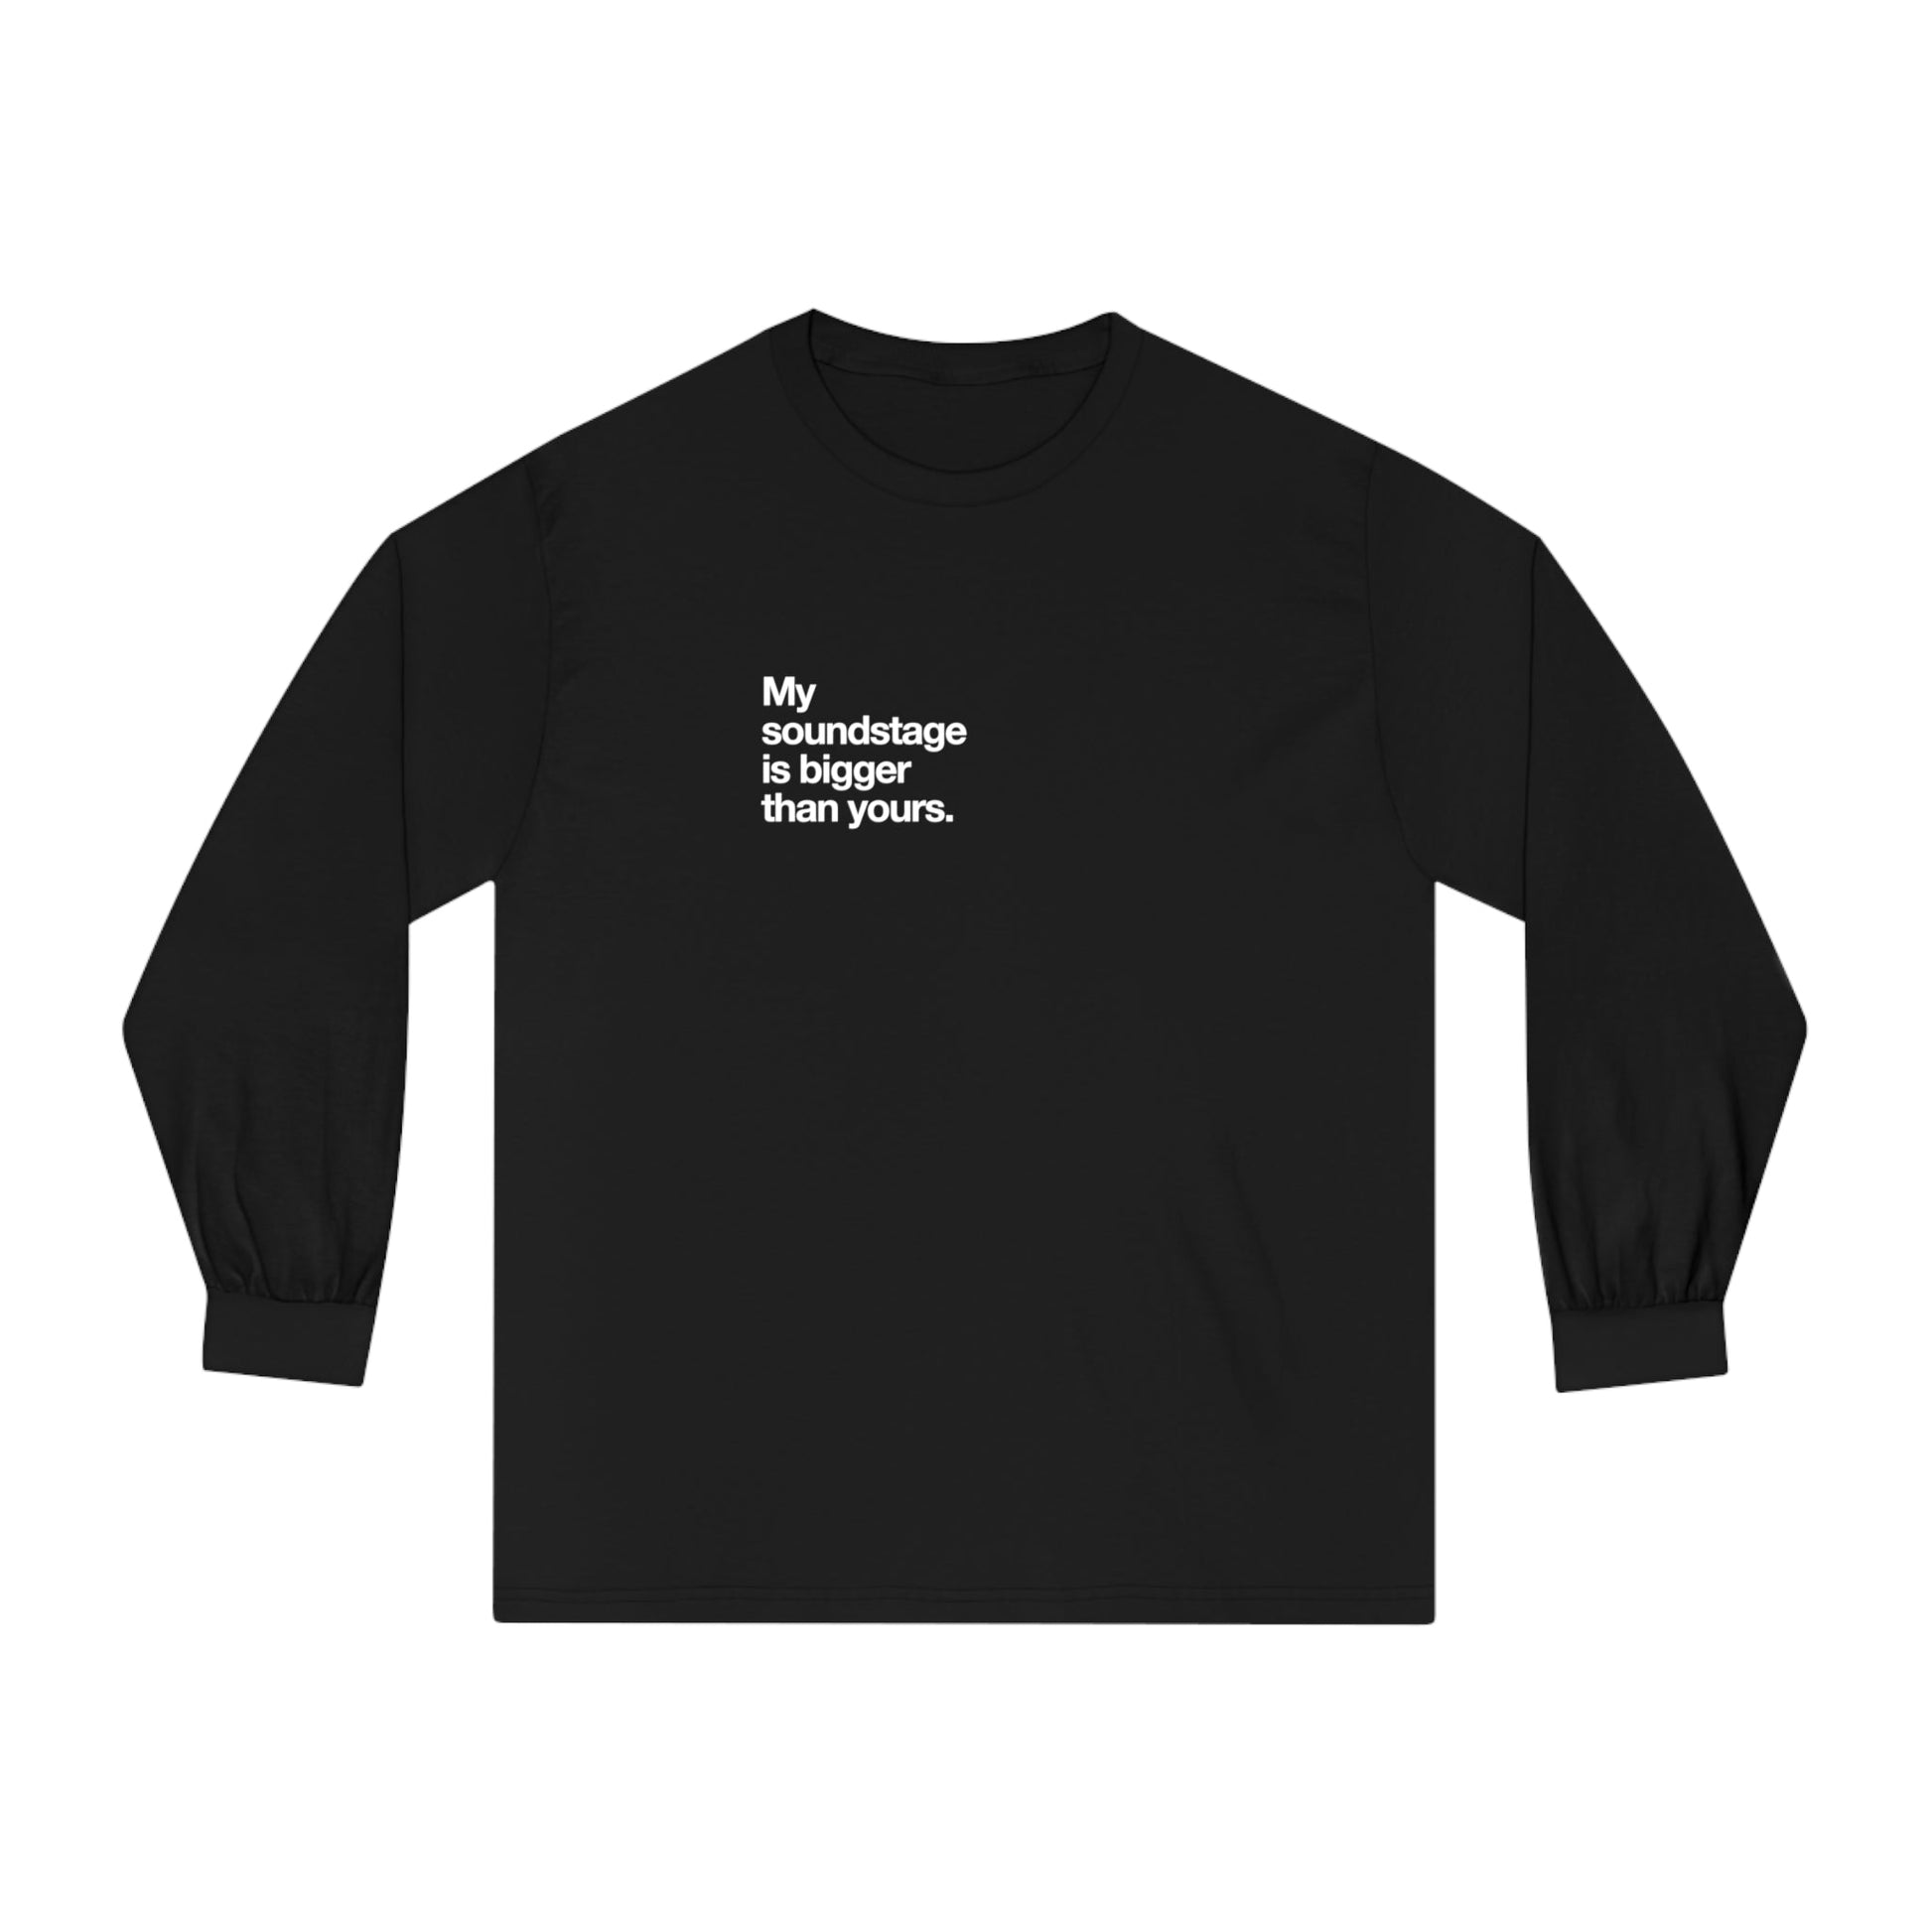 My soundstage ist bigger than yours long-sleeve. - Pure Neo Shop